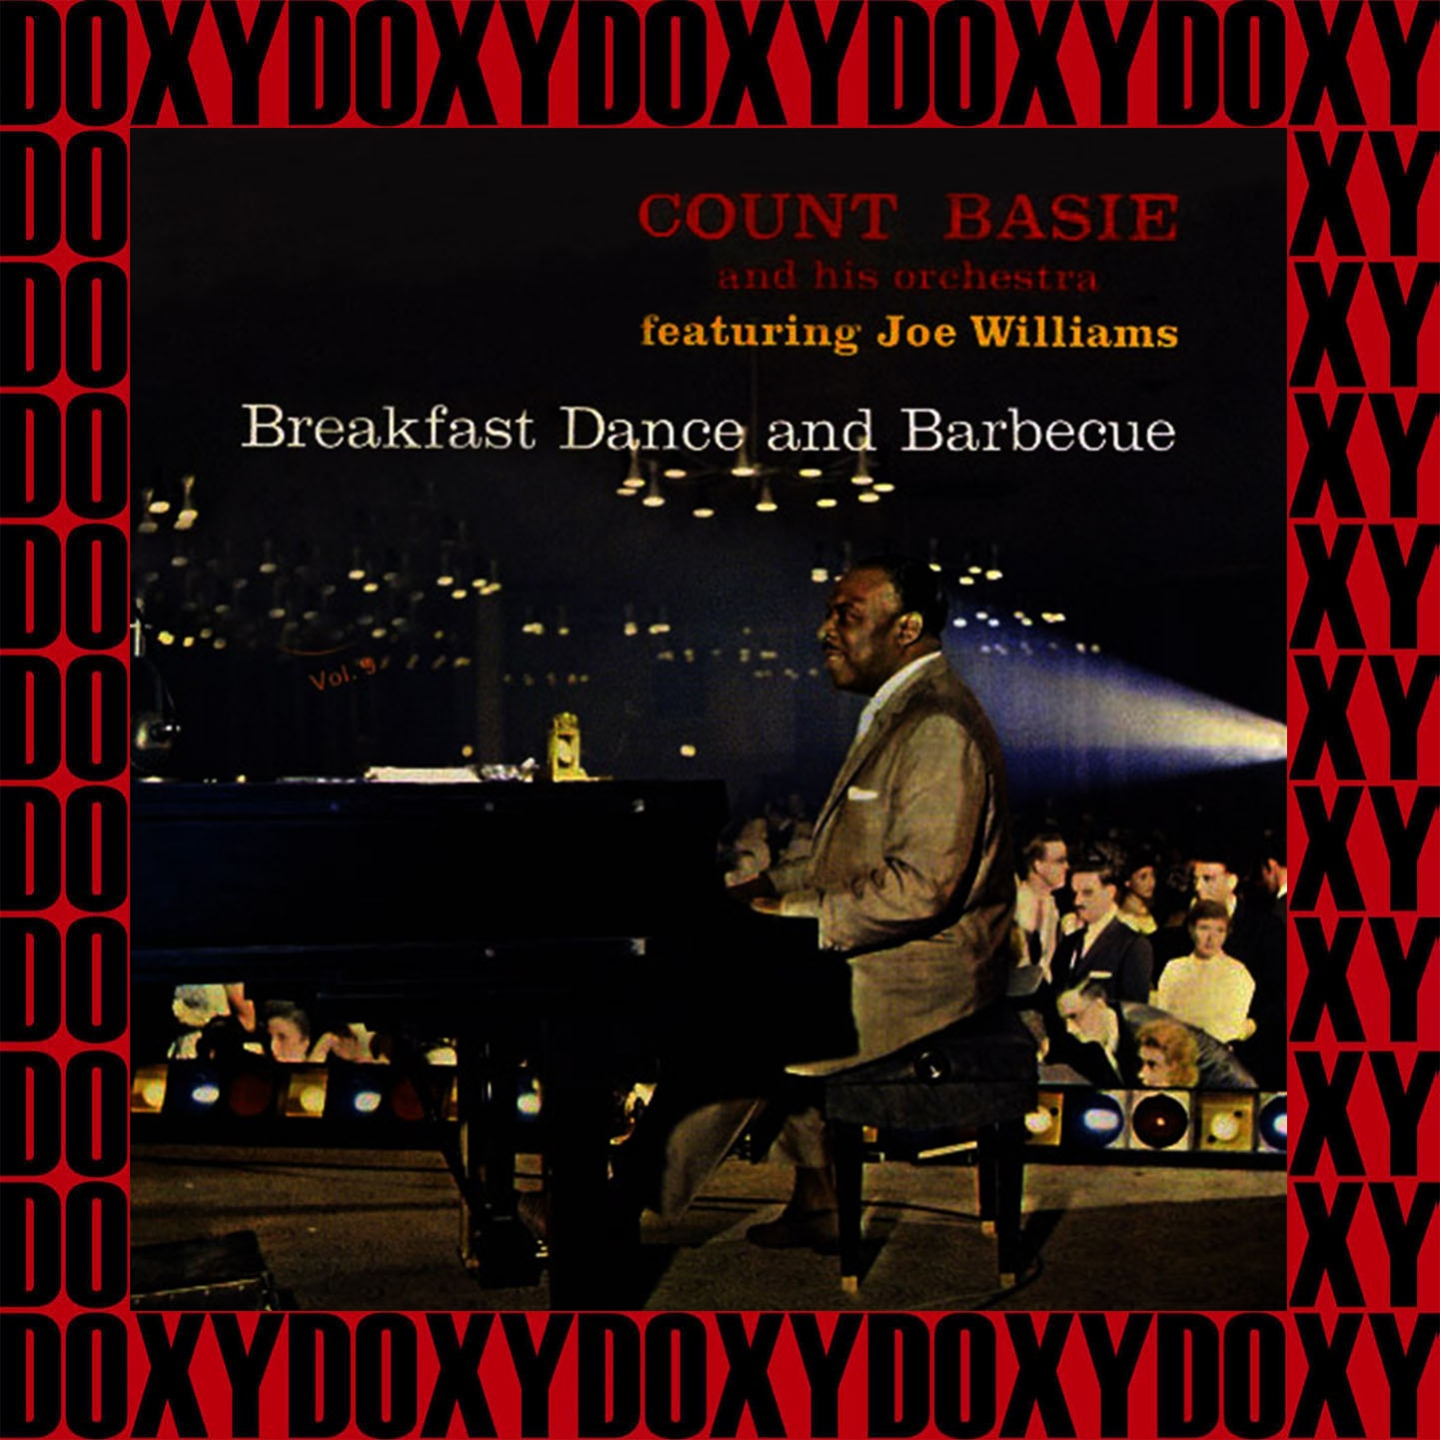 Breakfast Dance and Barbecue (Expanded, Remastered Version) (Doxy Collection)